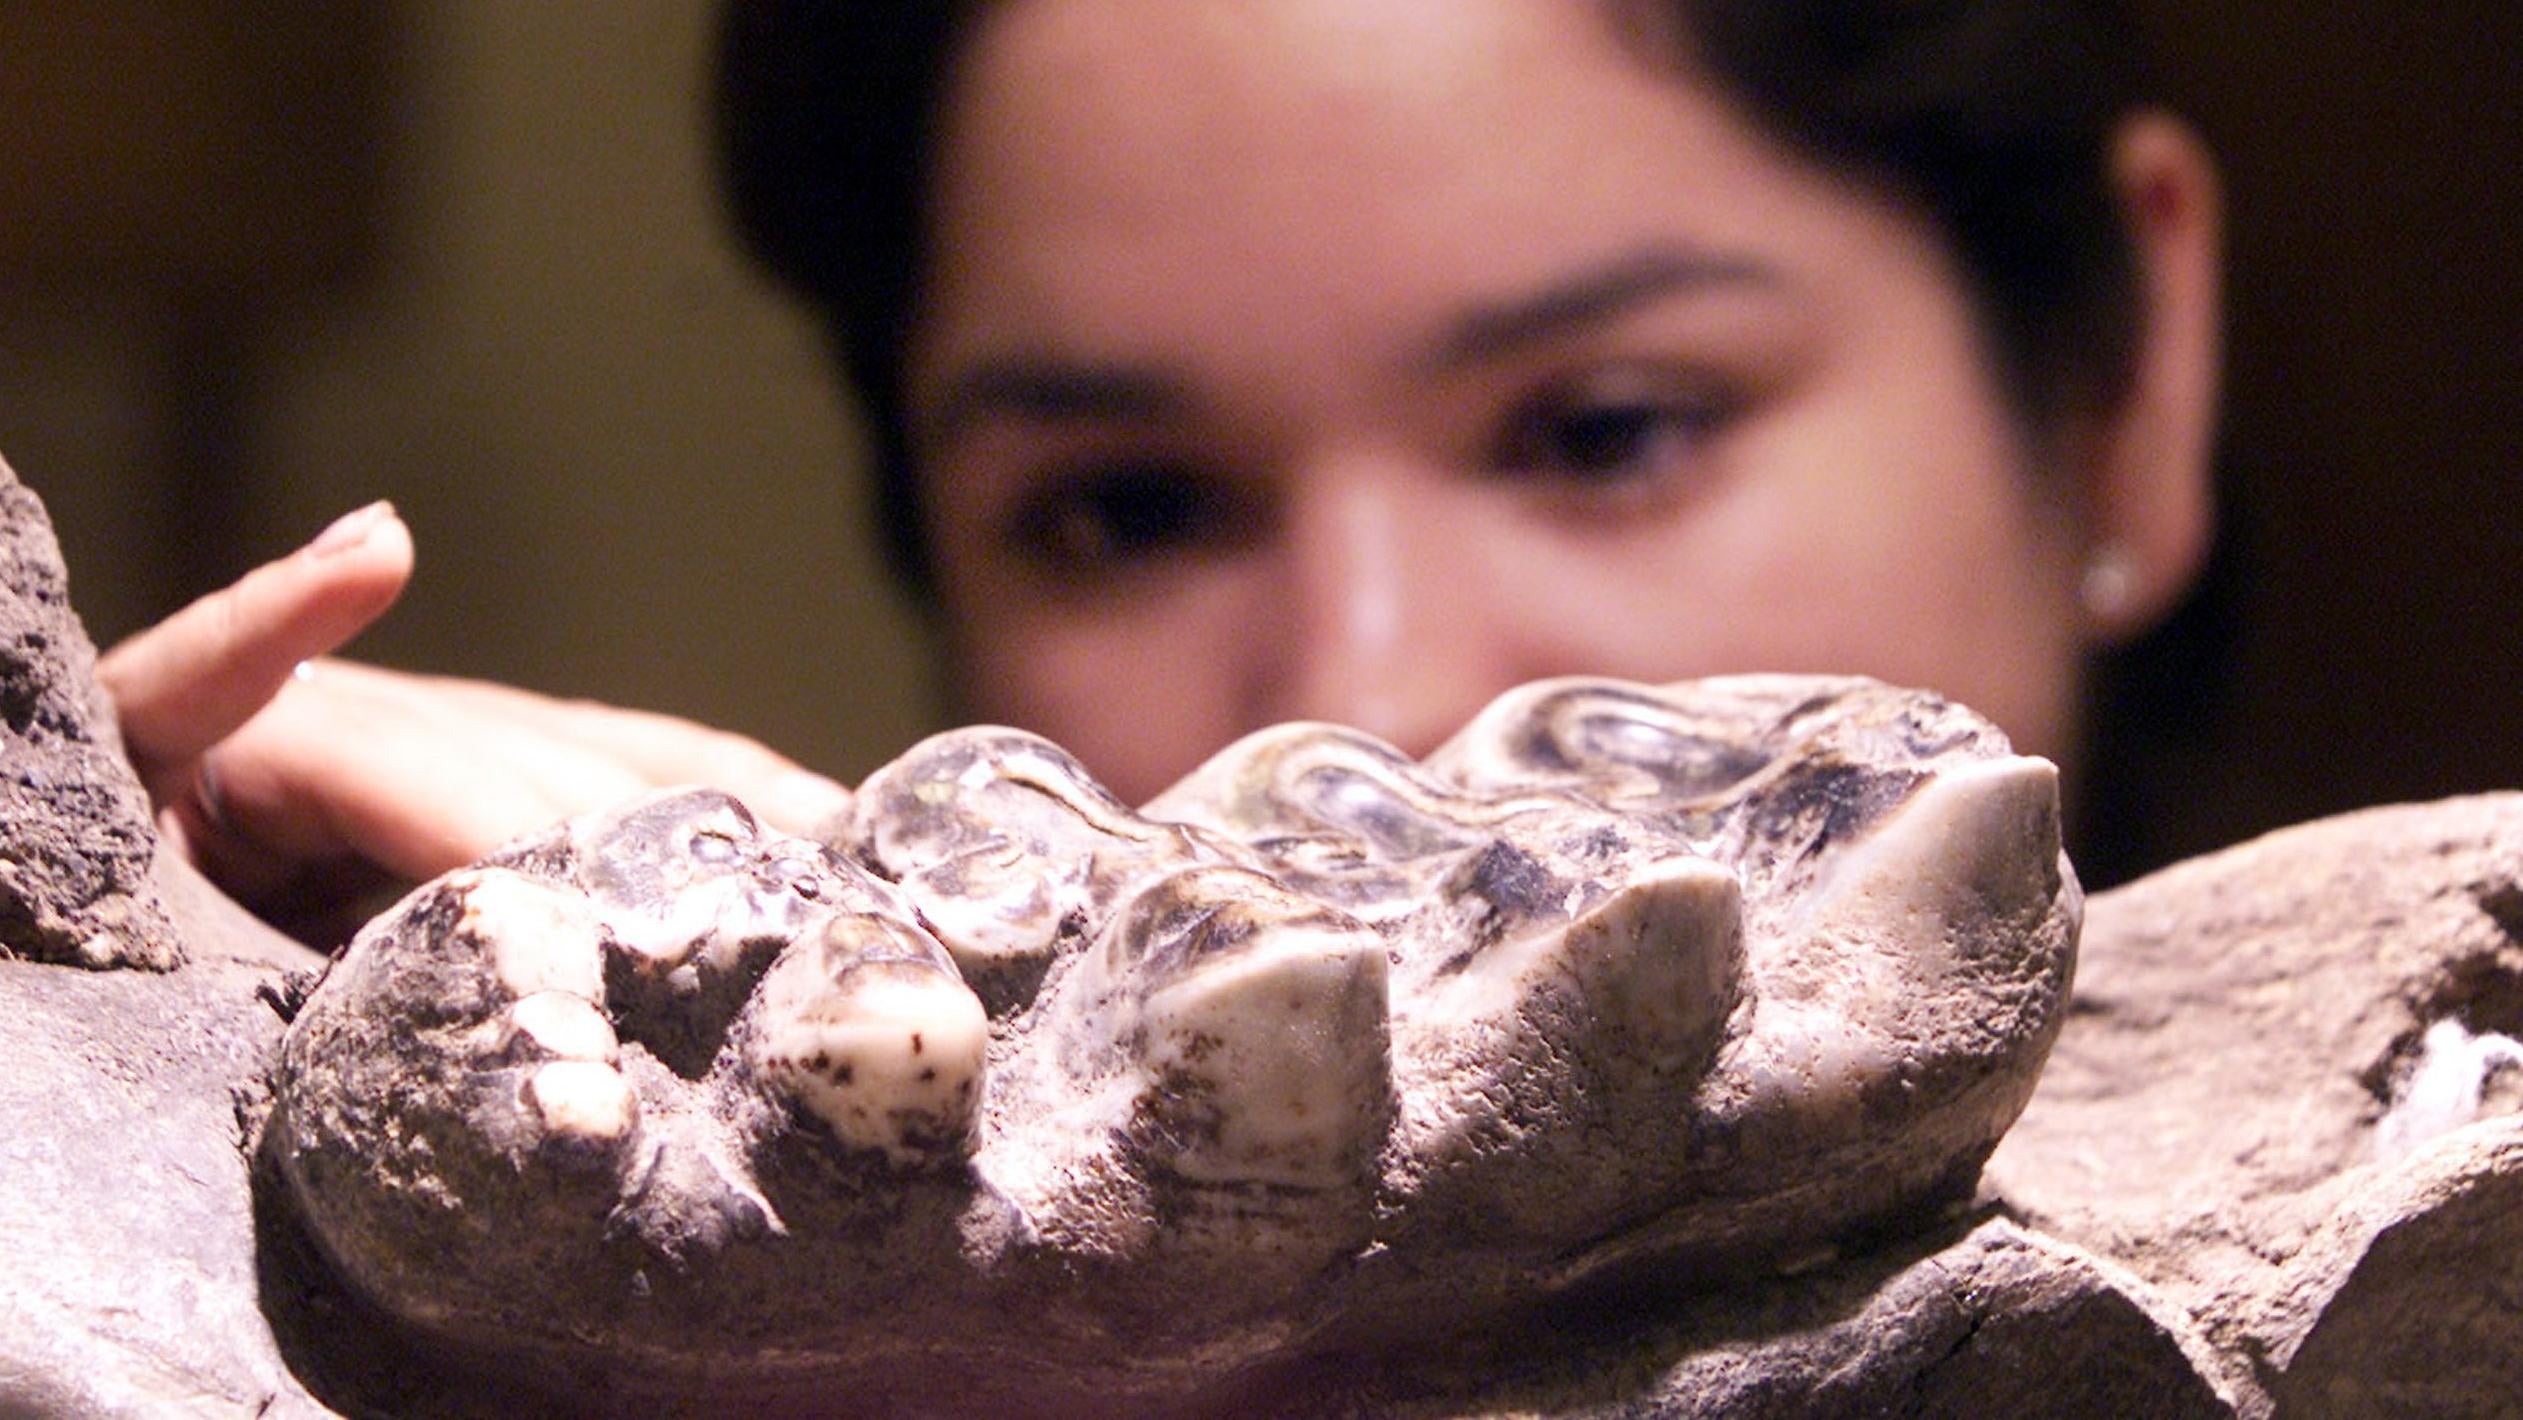 Ancient isotopes in teeth reveal animal's past movements. (Photo: Daniel LeClaire, Getty Images)